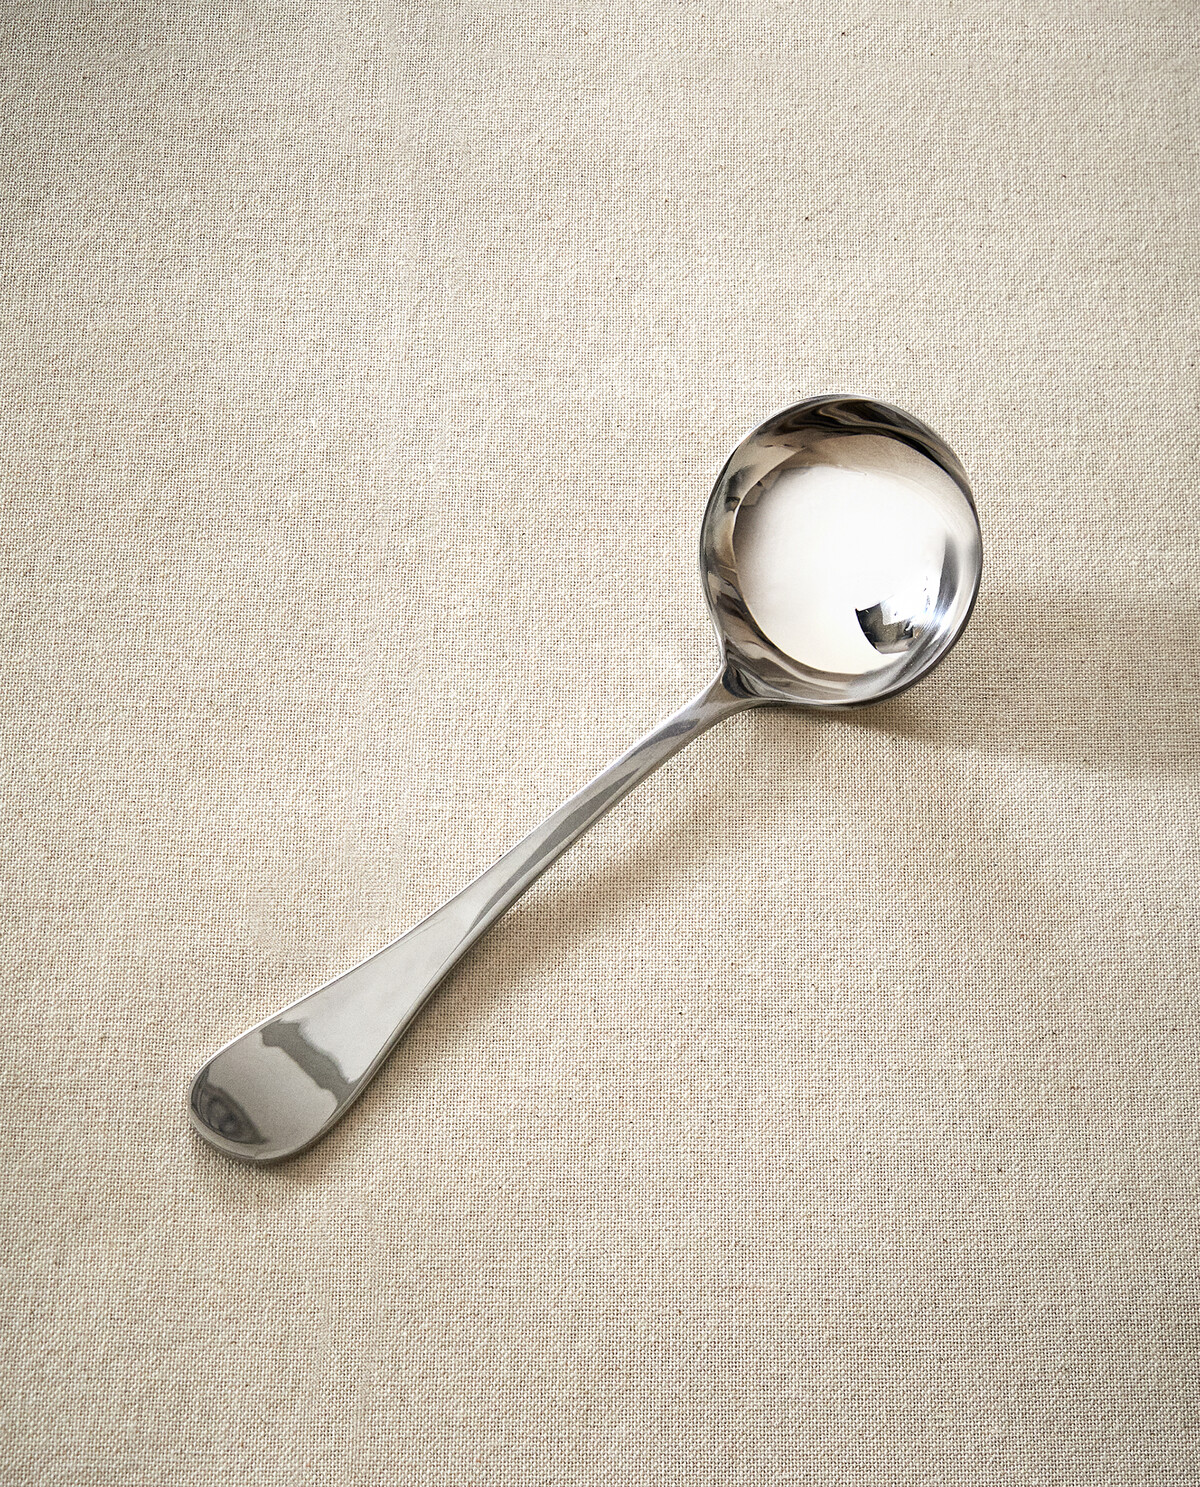 CLASSIC SERVING SPOON